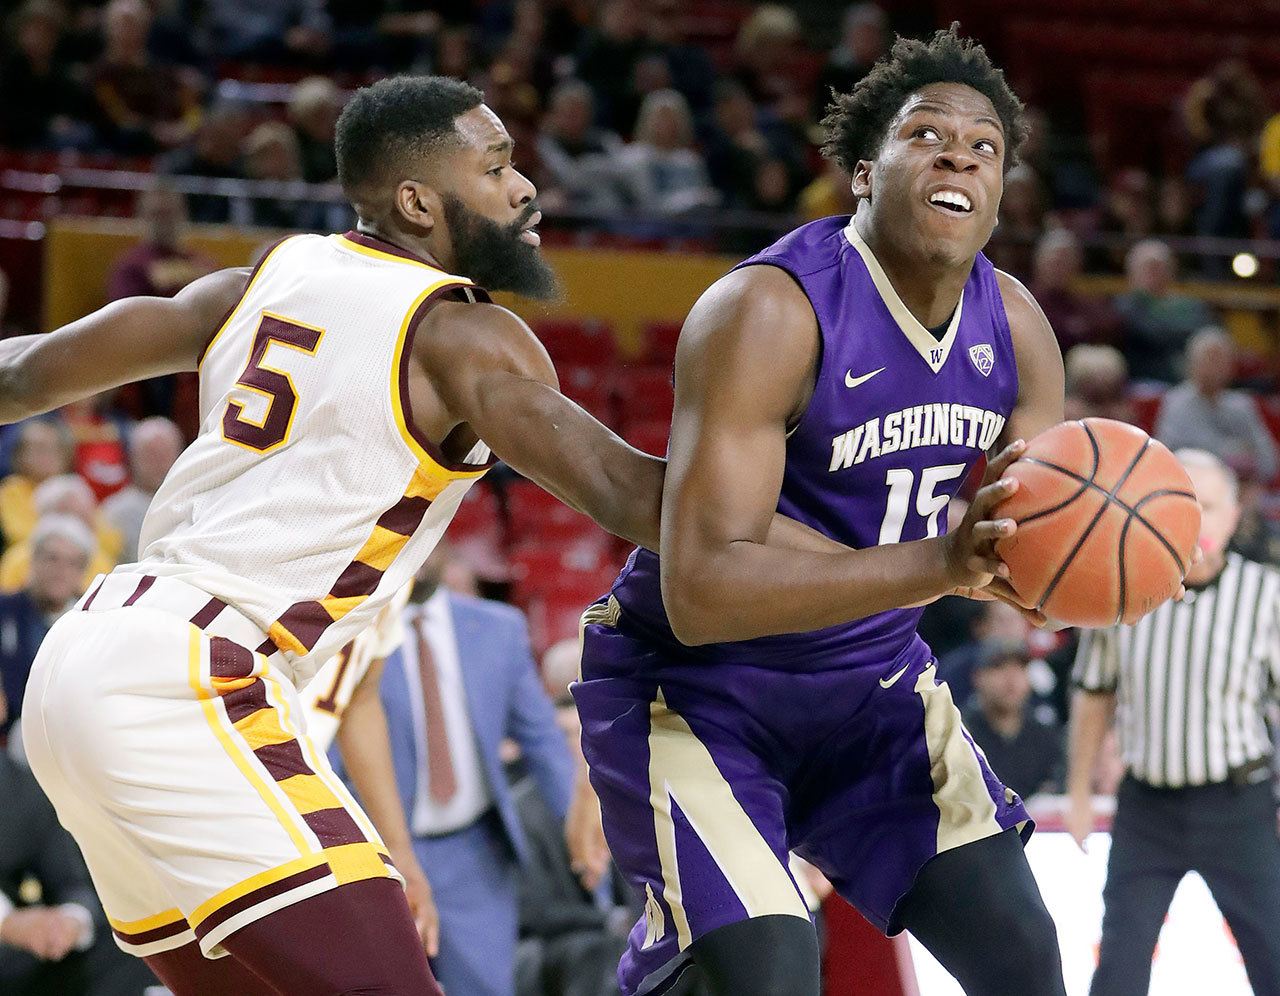 Washington’s Noah Dickerson (15) shown against Arizona State on Wednesday, is one of several UW players who must step up his offensive game to aid freshman star Markelle Fultz. (AP Photo/Matt York)